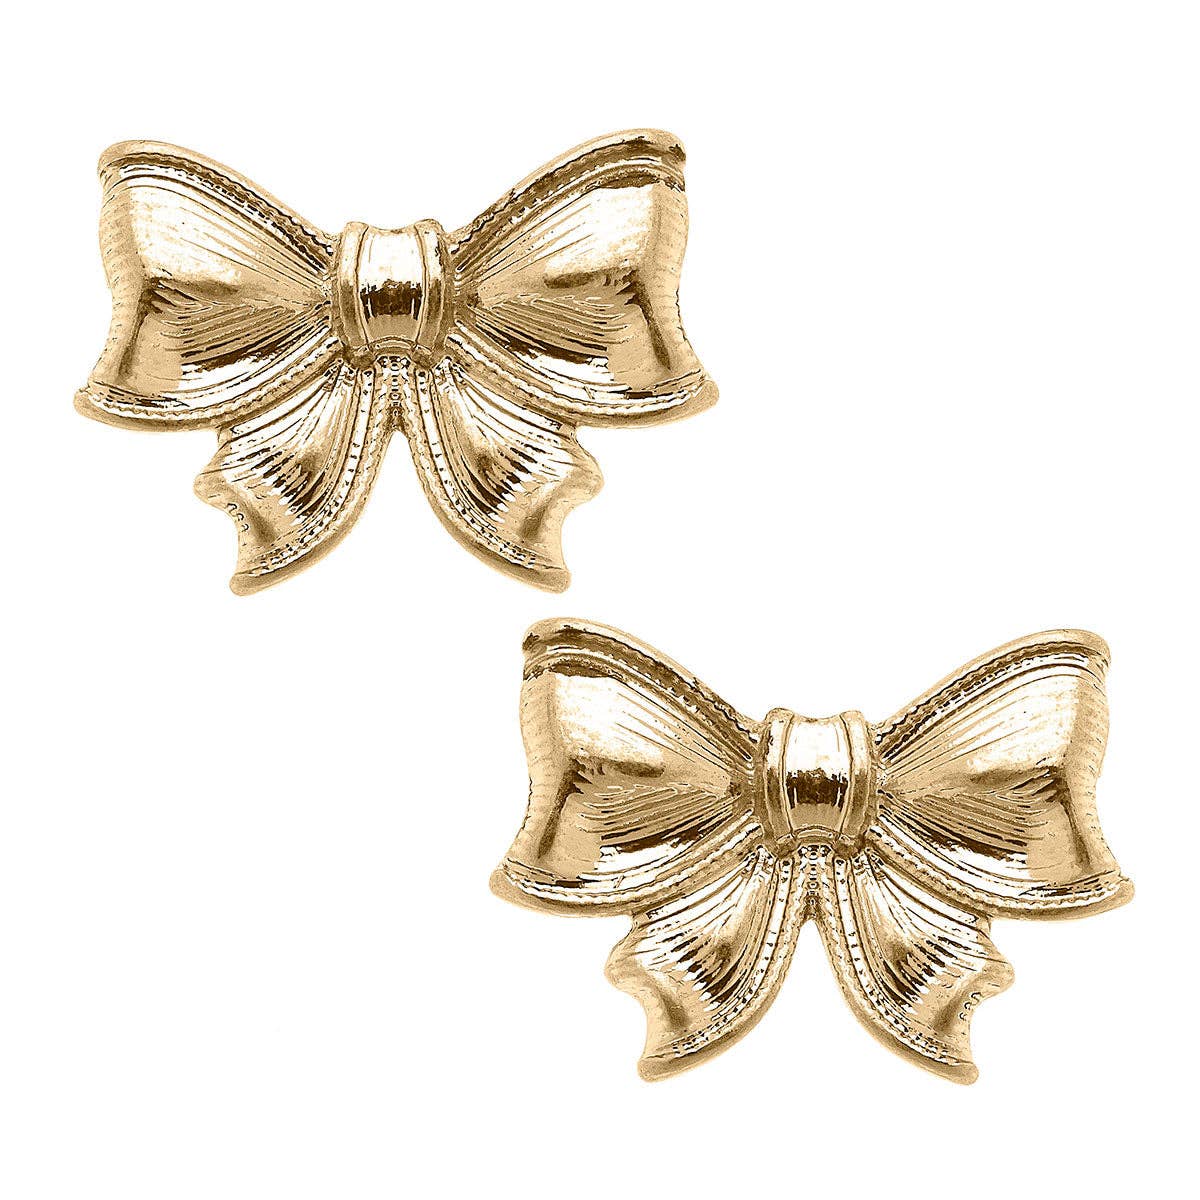 CANVAS Style - Waverly Bow Stud Earrings in Worn Gold